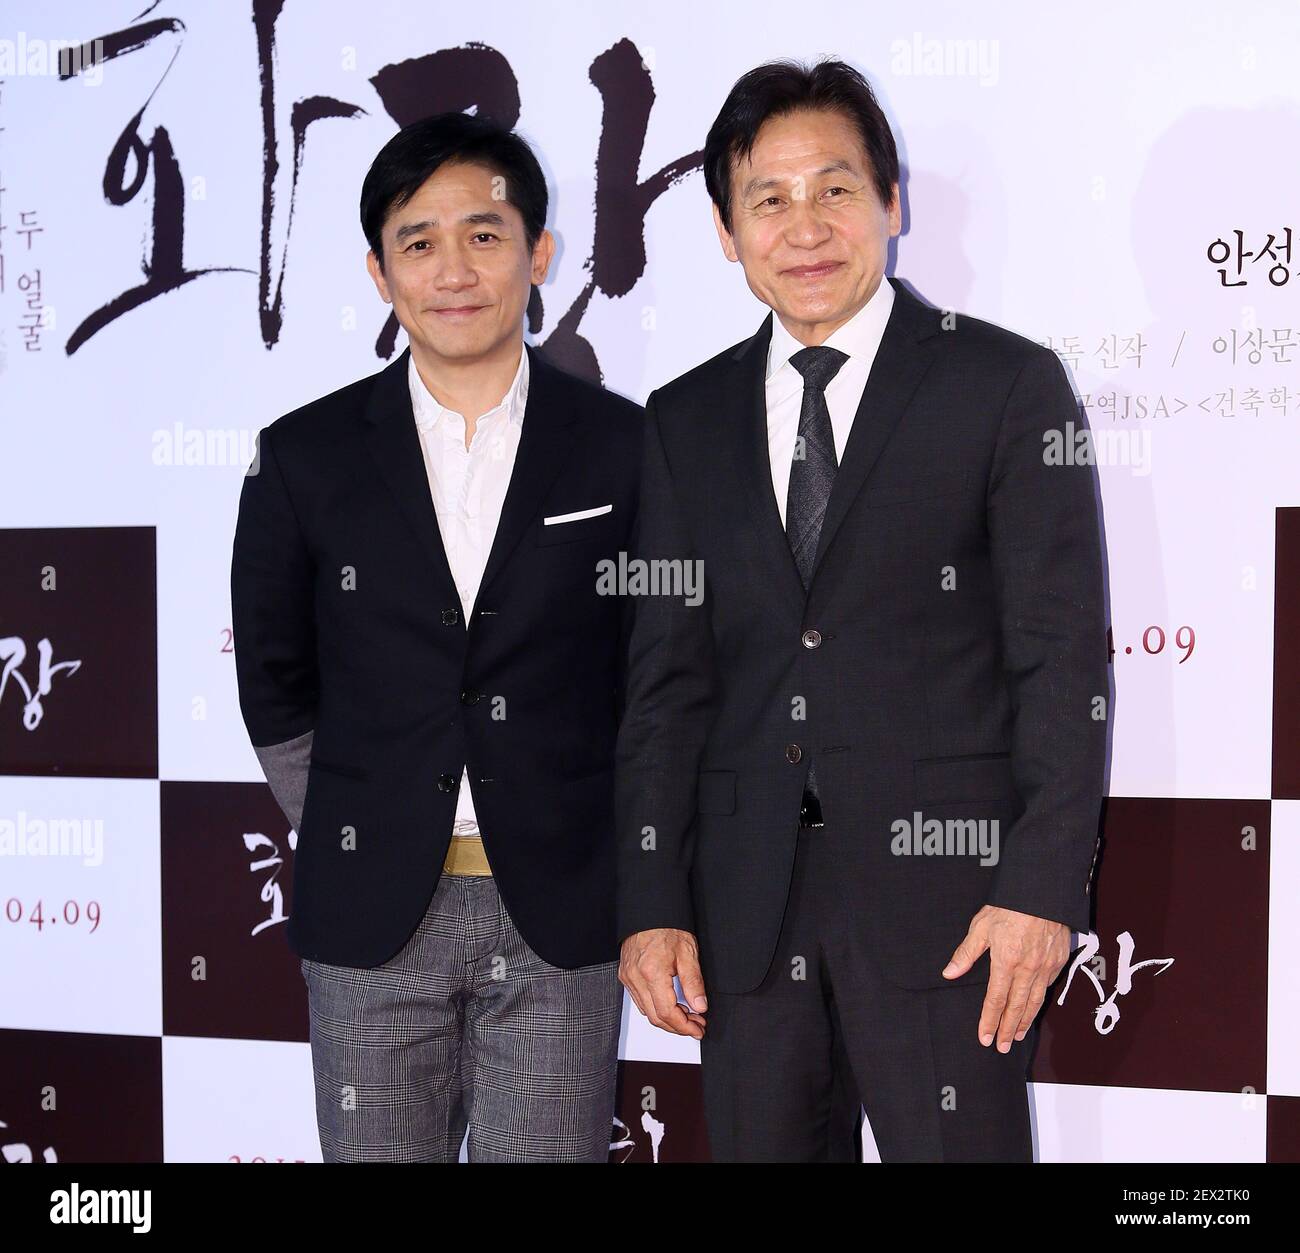 6 April 2015 - Seoul, South Korea : (L to R) Hong Kong actor Tony Leung (Leung Chiu Wai) and South Korean actor Ahn Sung-ki, attend a photo call for the new film "Revivre" VIP premiere at Lotte Cinema in Seoul, South Korea on April 6, 2015. The movie will appear on South Korea screens starting on April 9. Photo Credit: Lee Young-ho *** Please Use Credit from Credit Field *** Stock Photo